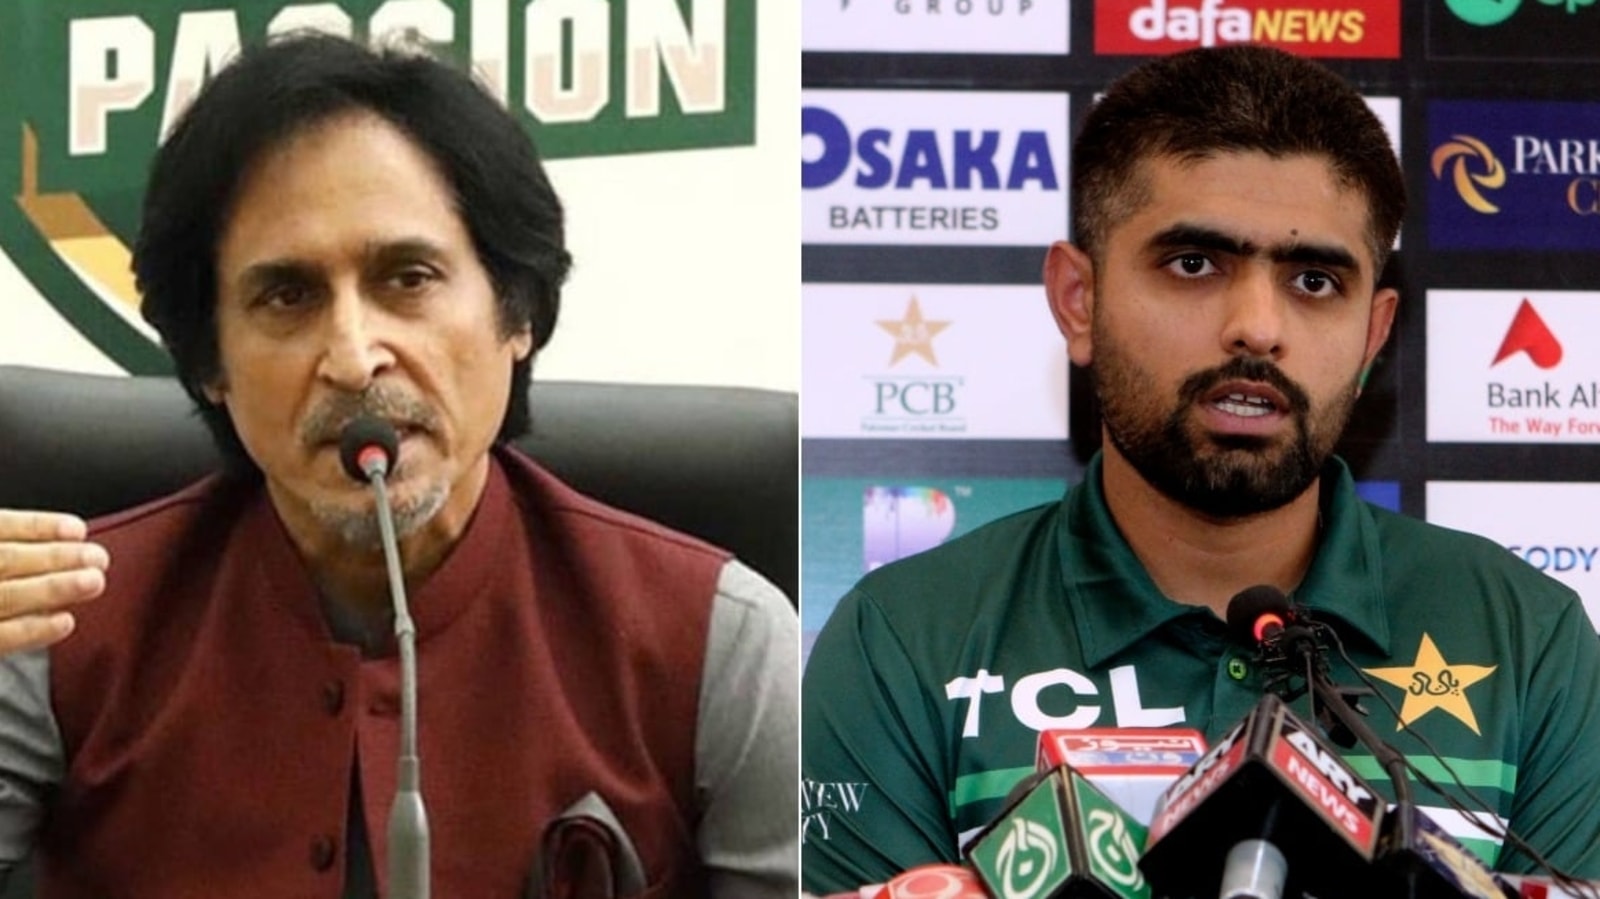 they-should-not-embarrass-themselves-pakistan-legend-s-fiery-warning-to-babar-azam-ramiz-raja-ahead-of-t20-world-cup